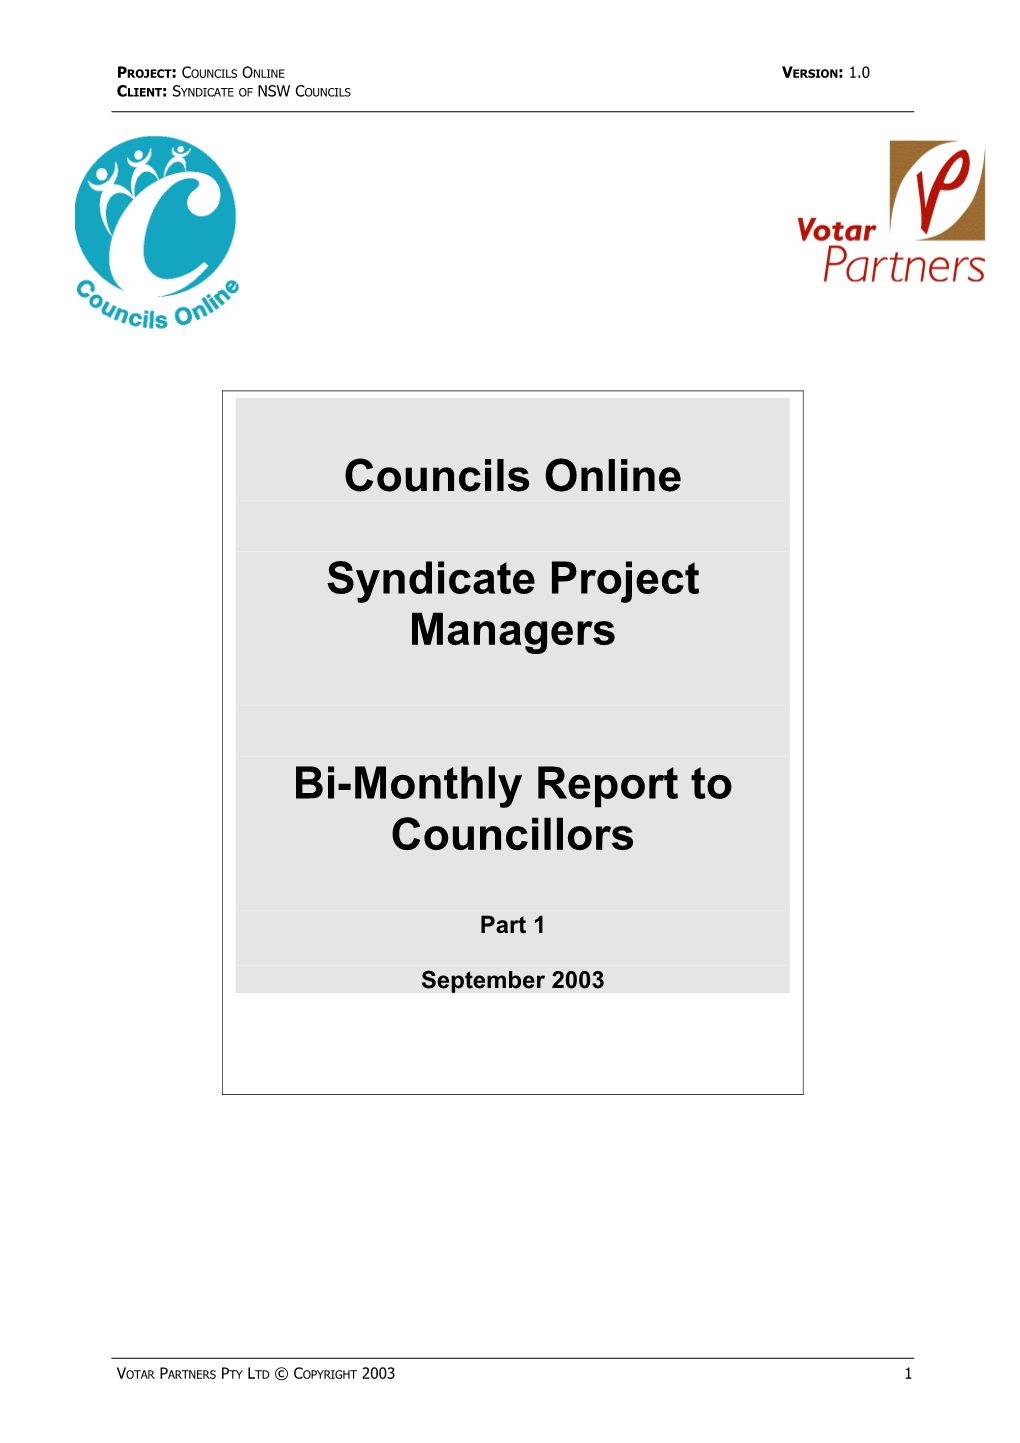 Bi-Monthly Report to Councils